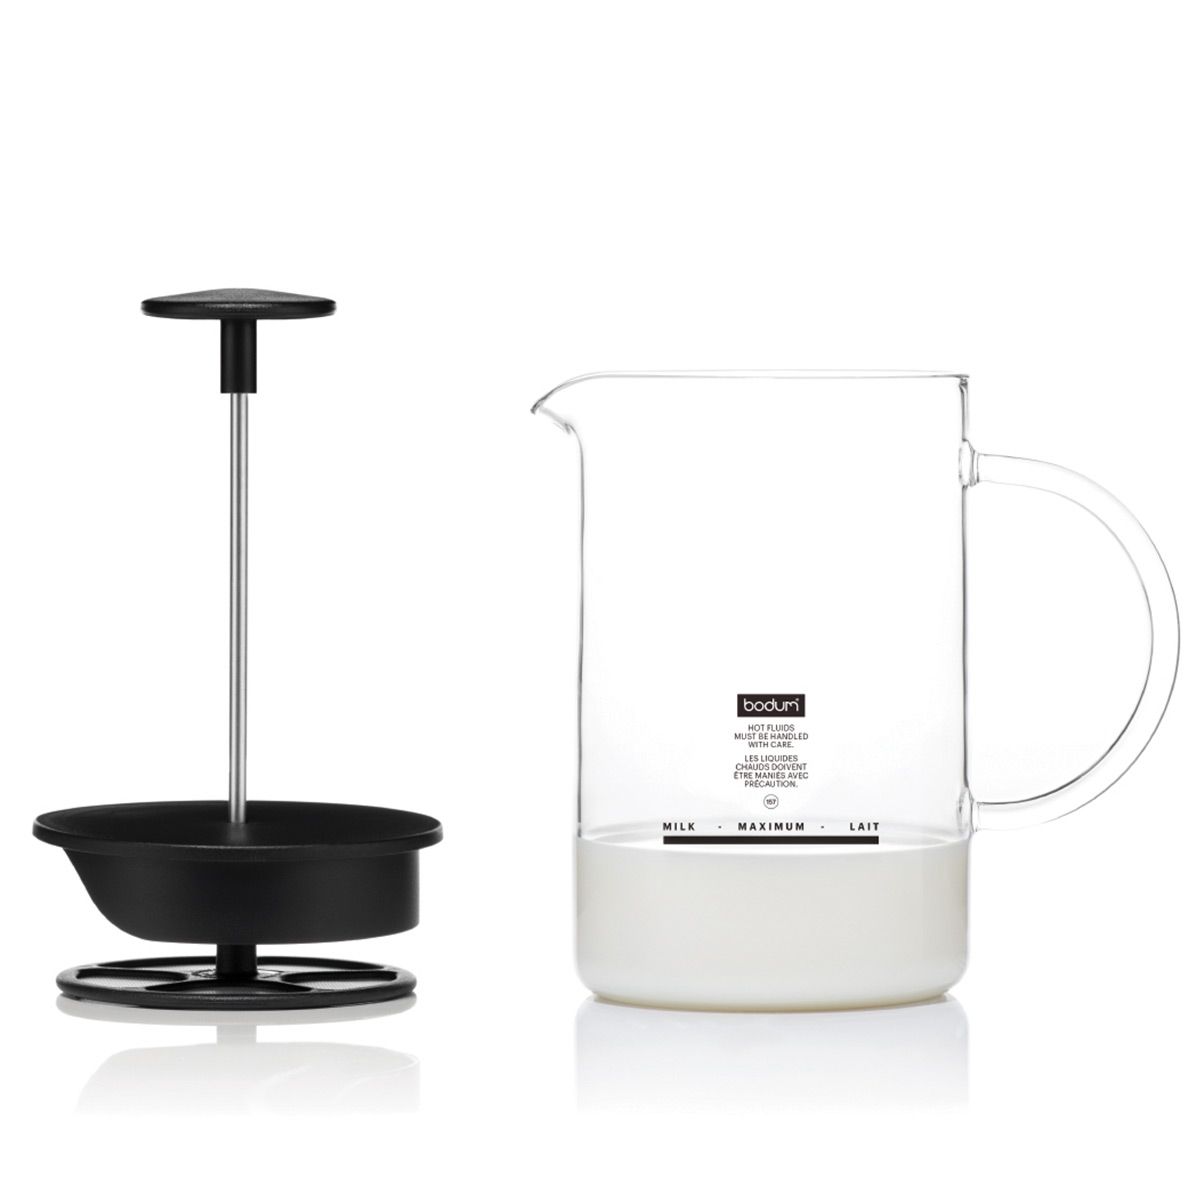 How to Clean Bodum 1446-01Us4 Latteo Manual Milk Frother? 